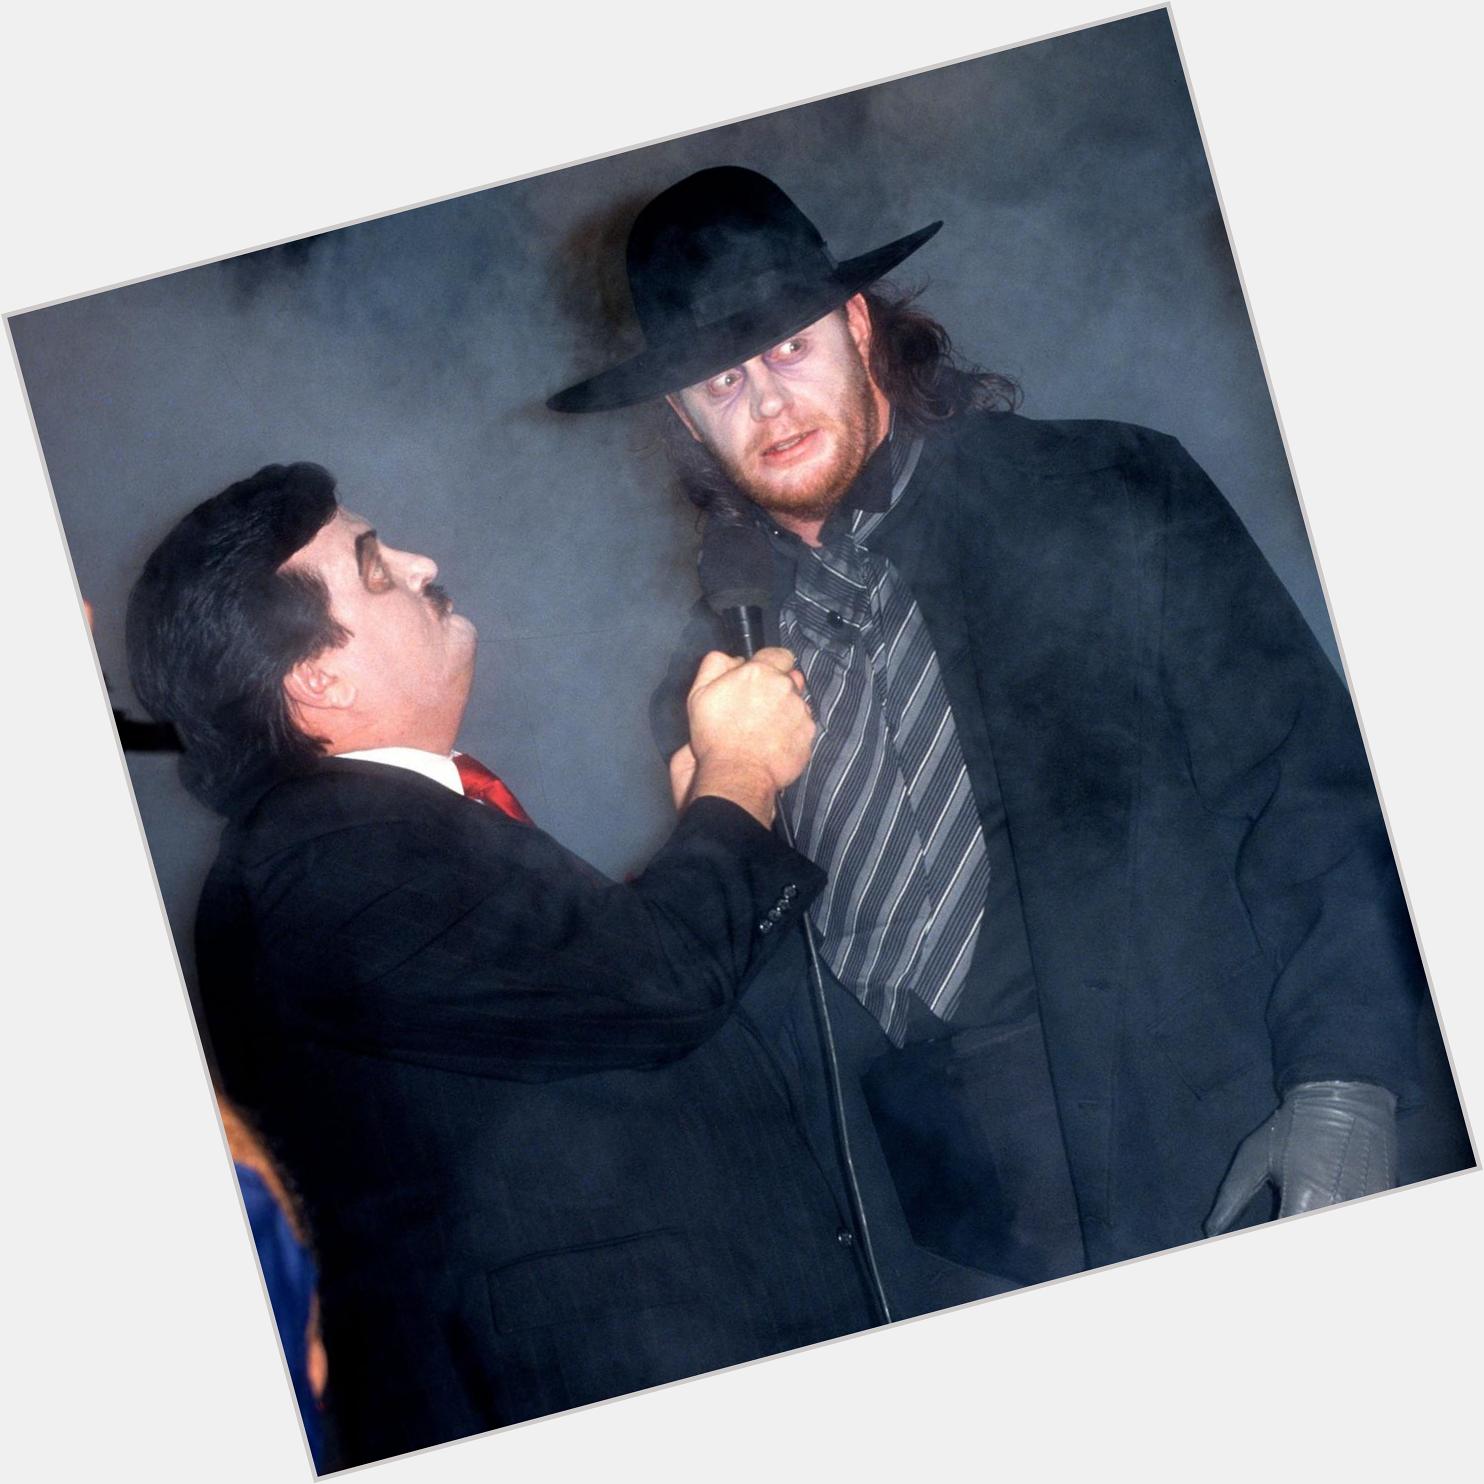  55 years old and still one of the biggest attractions in WWE. Happy birthday to The Undertaker! 